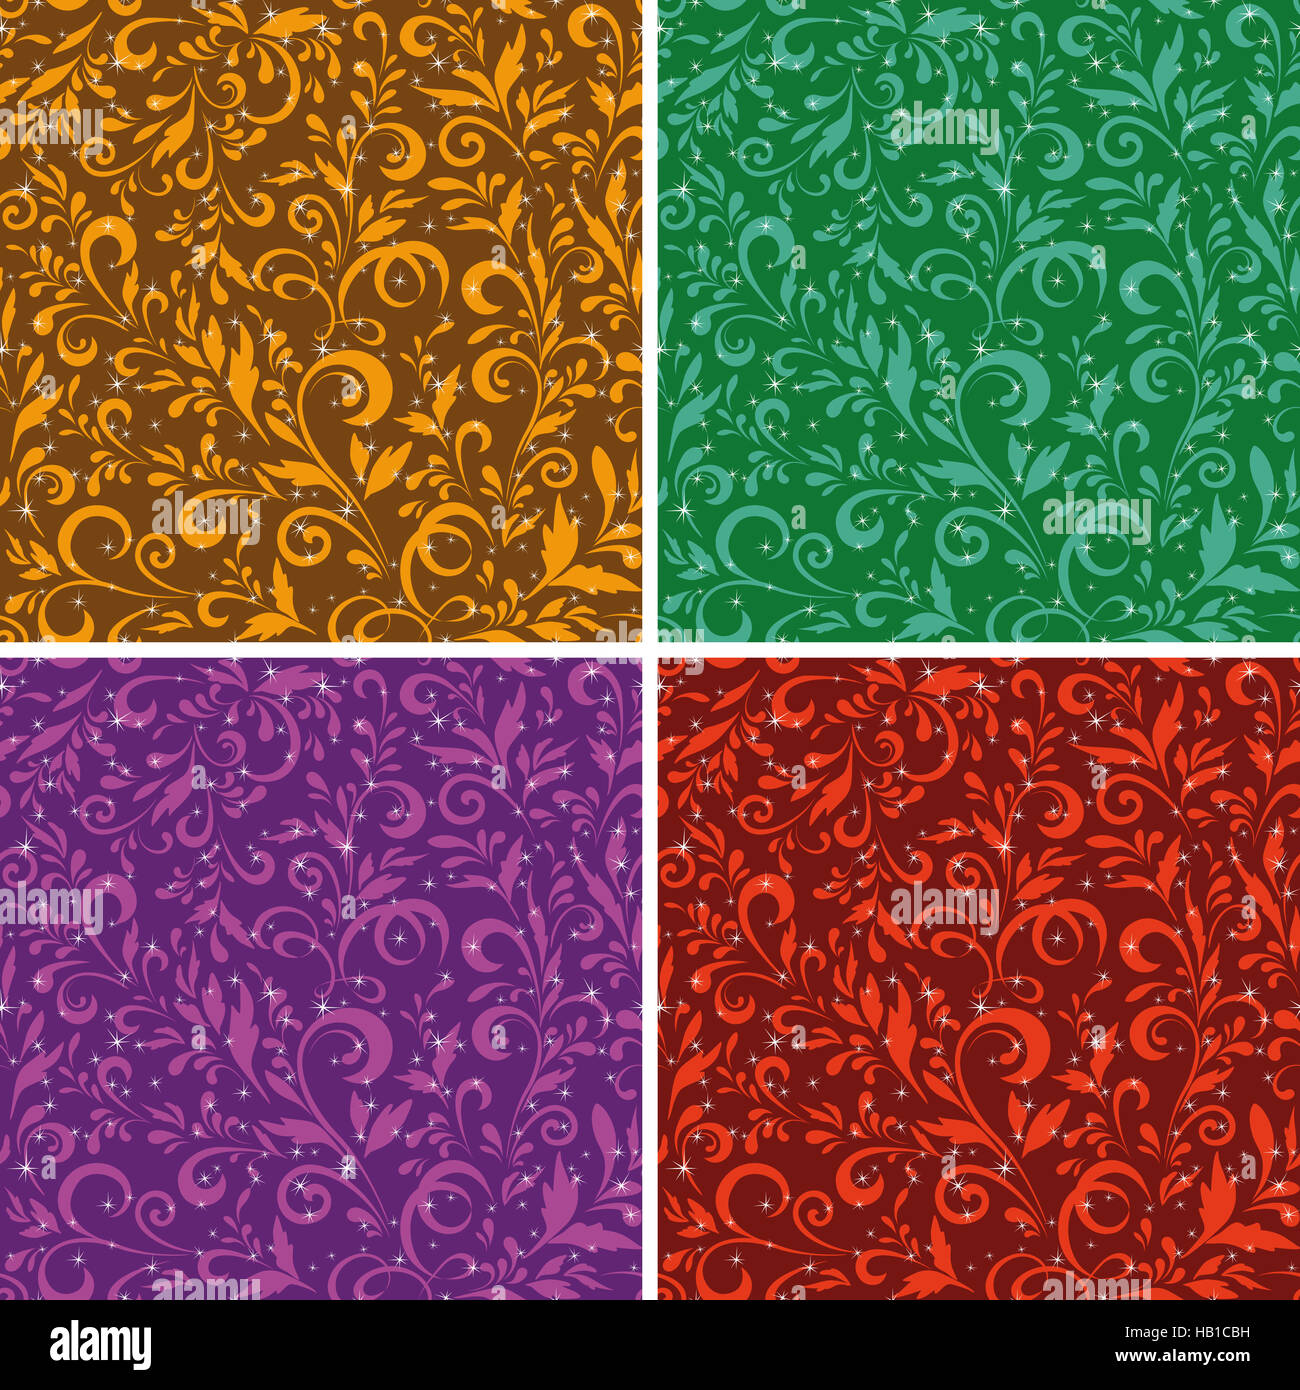 Seamless Floral Patterns Stock Photo